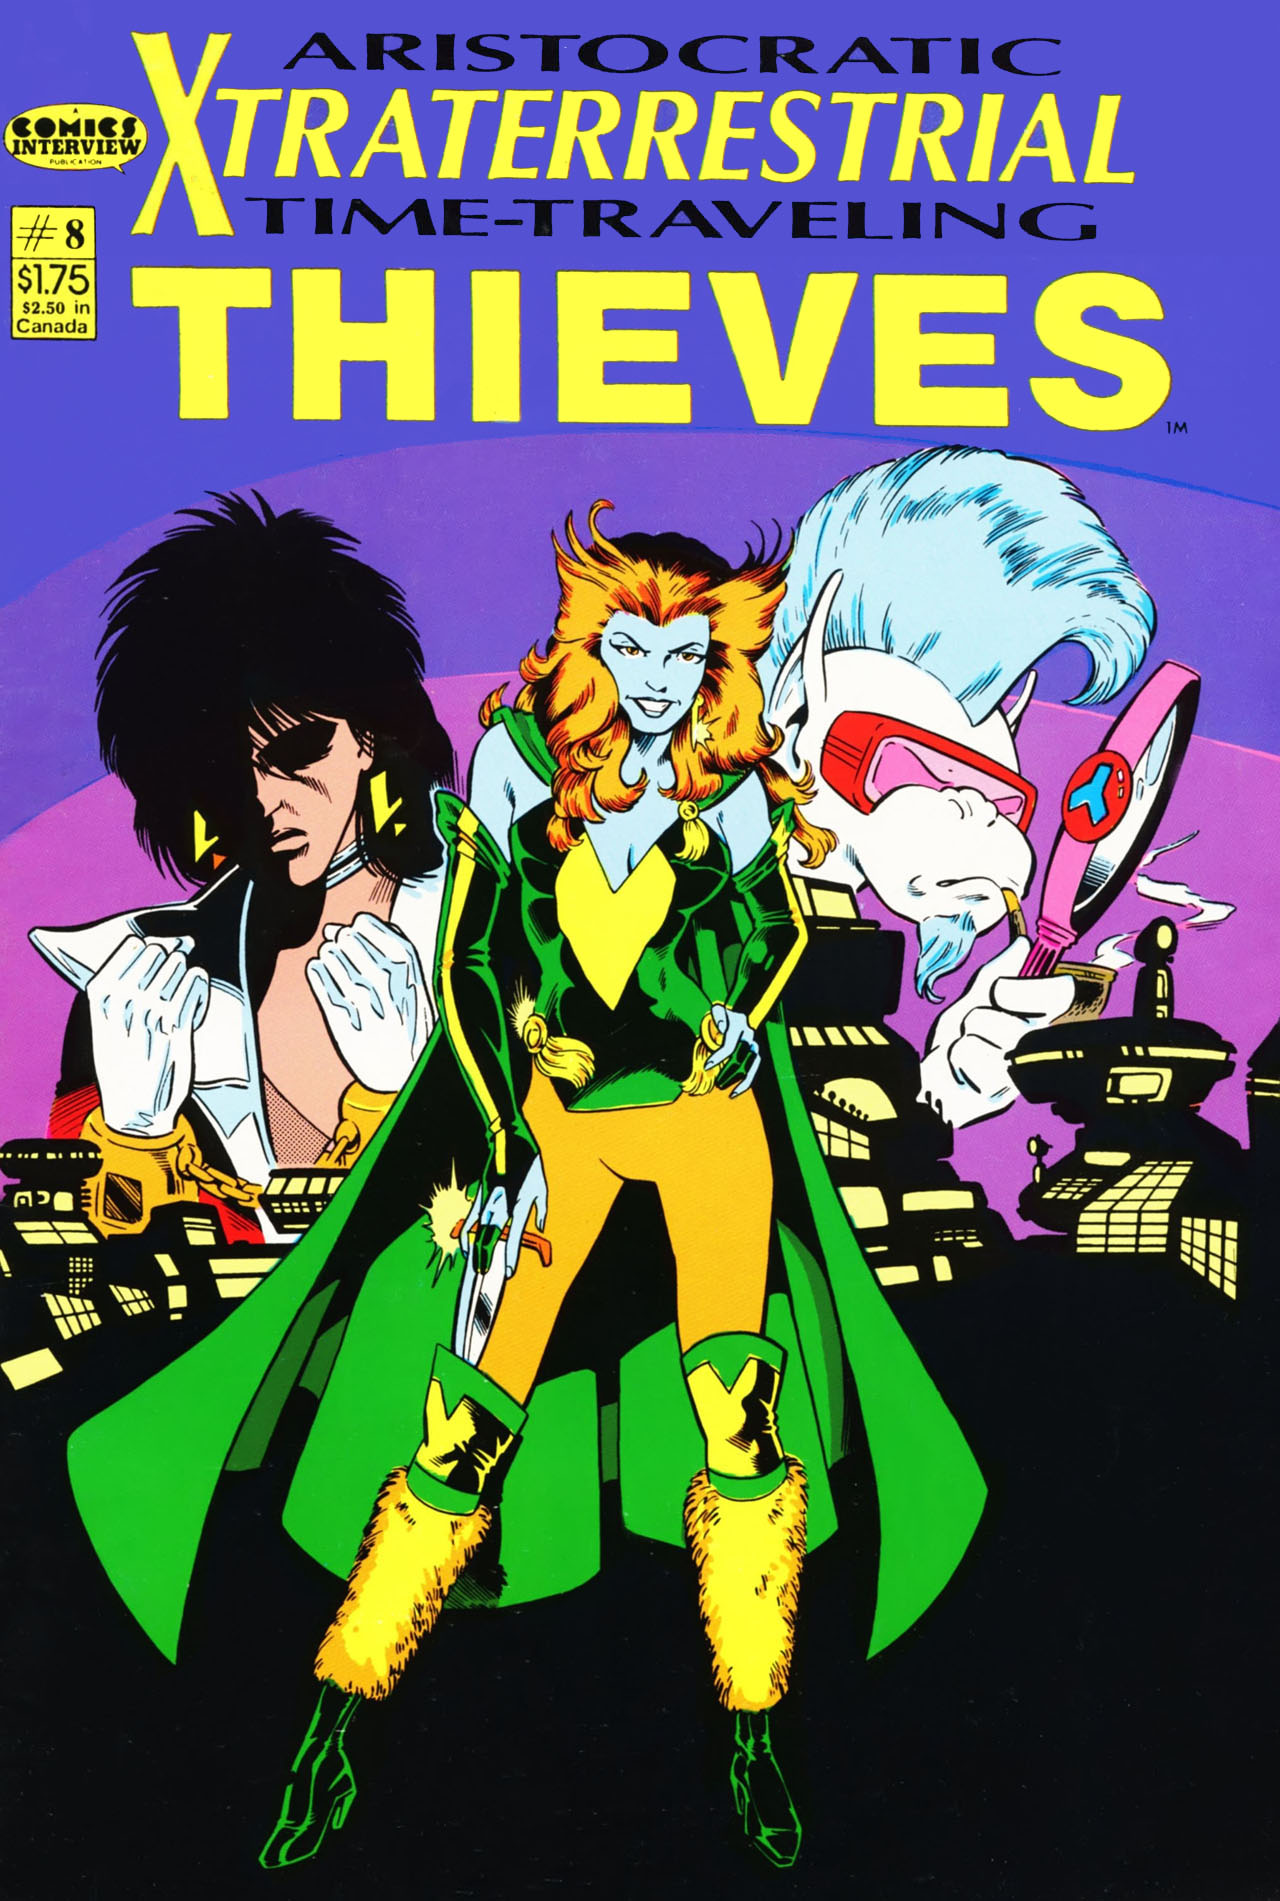 Read online Aristocratic Xtraterrestrial Time-Traveling Thieves comic -  Issue #8 - 1